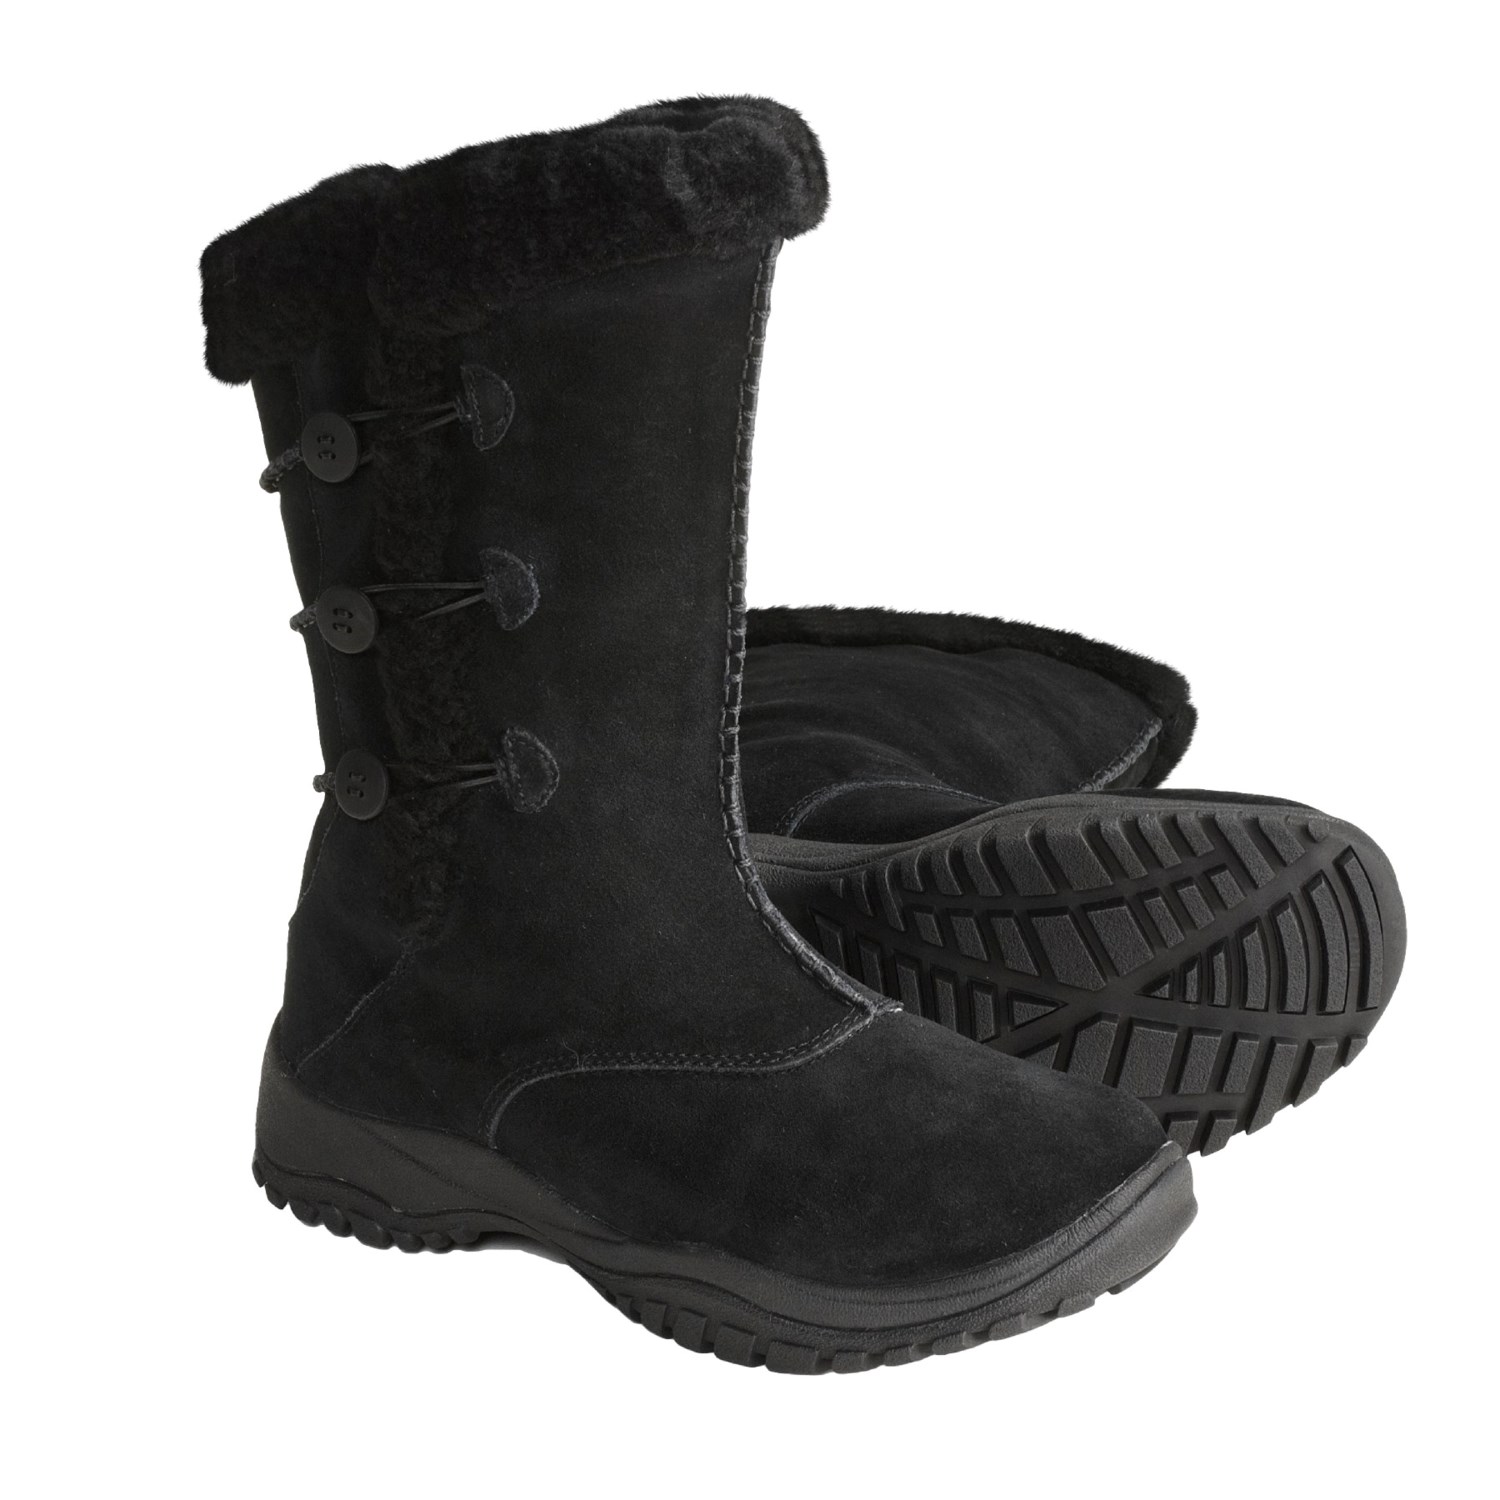 Baffin Dawa Suede Winter Boots (For Women) 3763W - Save 32%